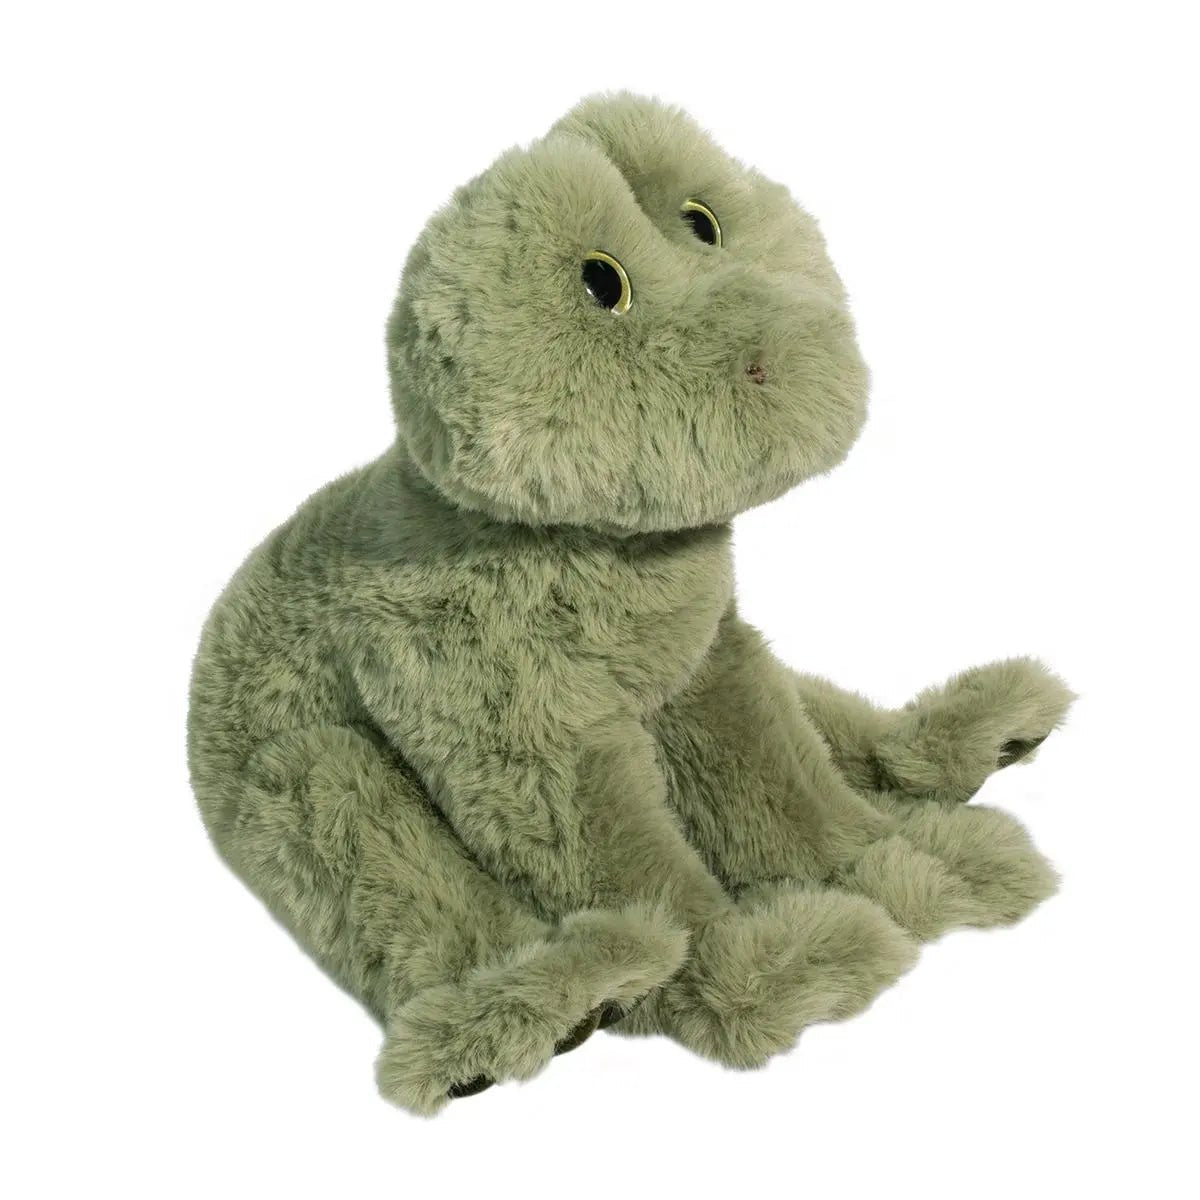 A Finnie Soft Frog plush toy sitting on a white background, ready for cuddles.